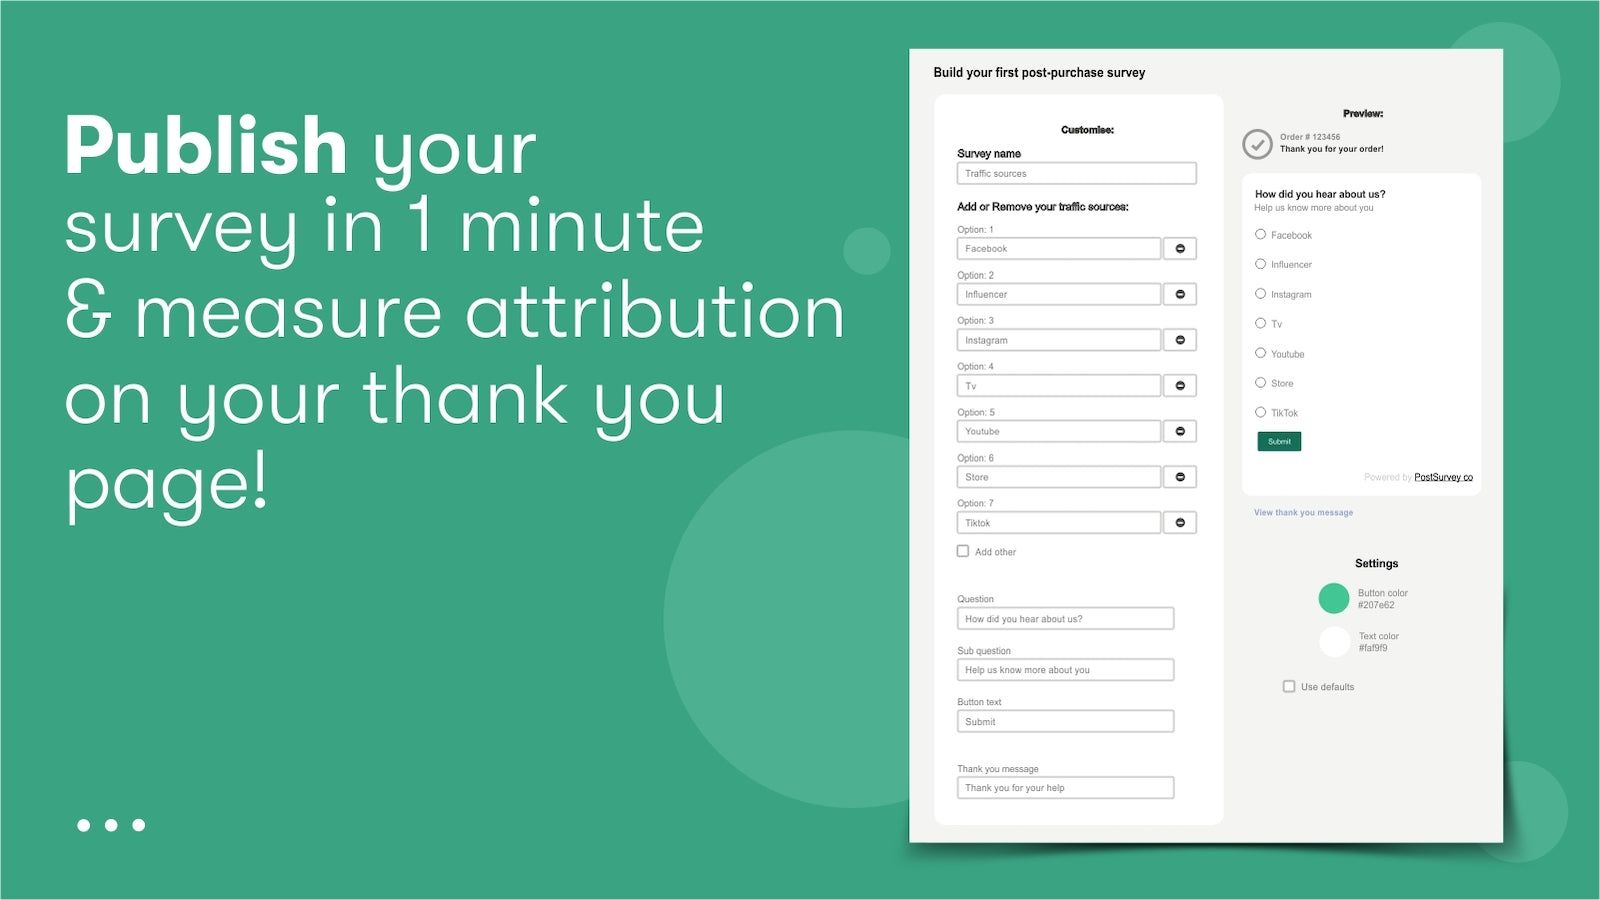 Publish post purchase survey in 1min